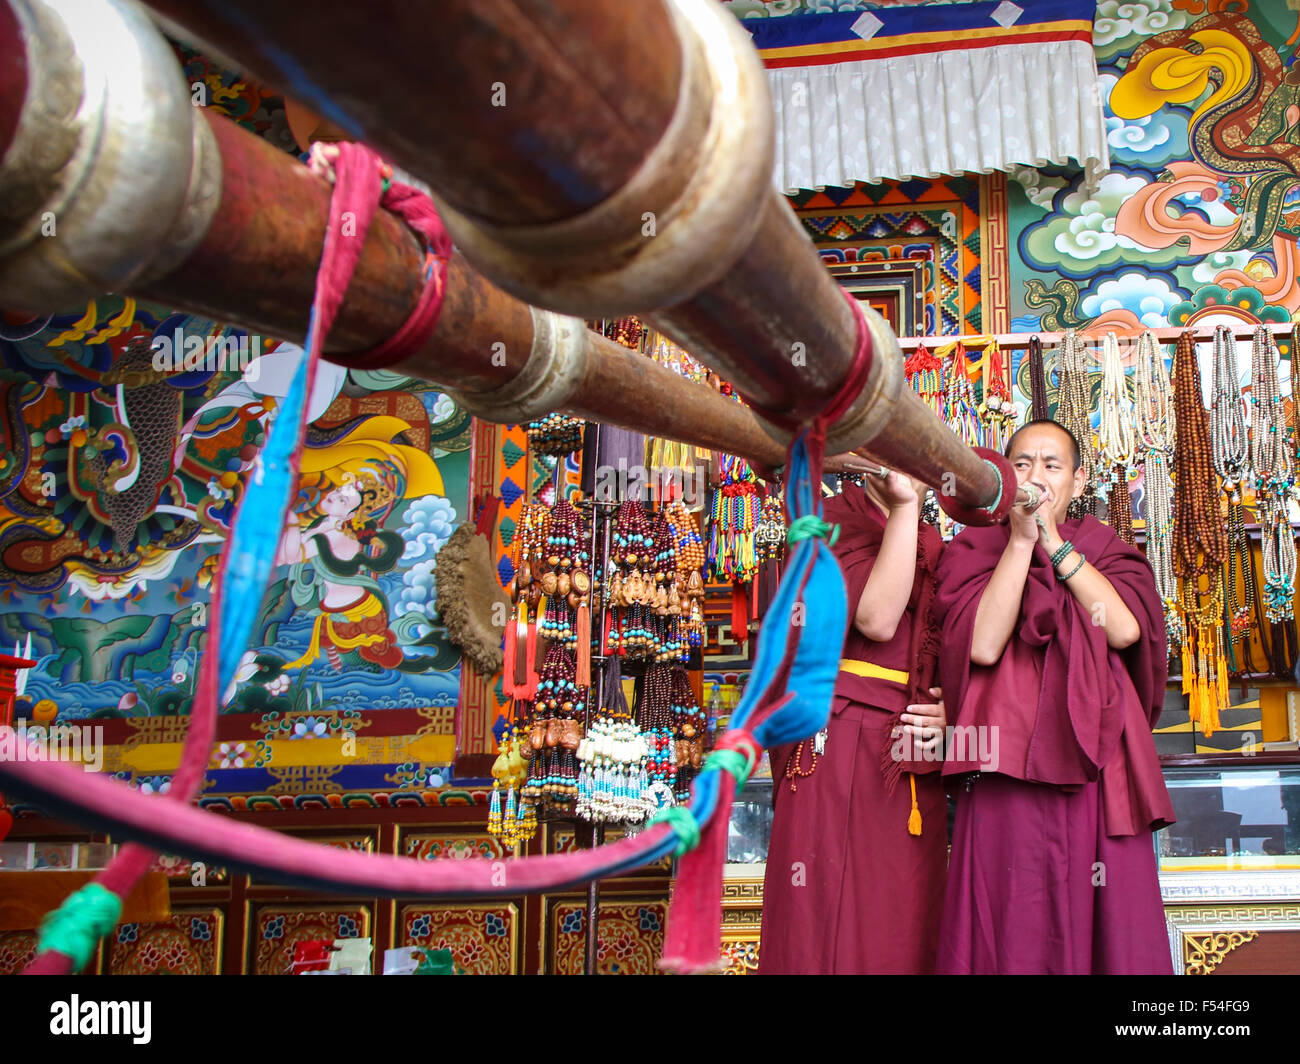 Monk in Ganden Sumtseling Monastery, also known as Sungtseling and Guihuasi is a Tibetan Buddhist monastery. Stock Photo